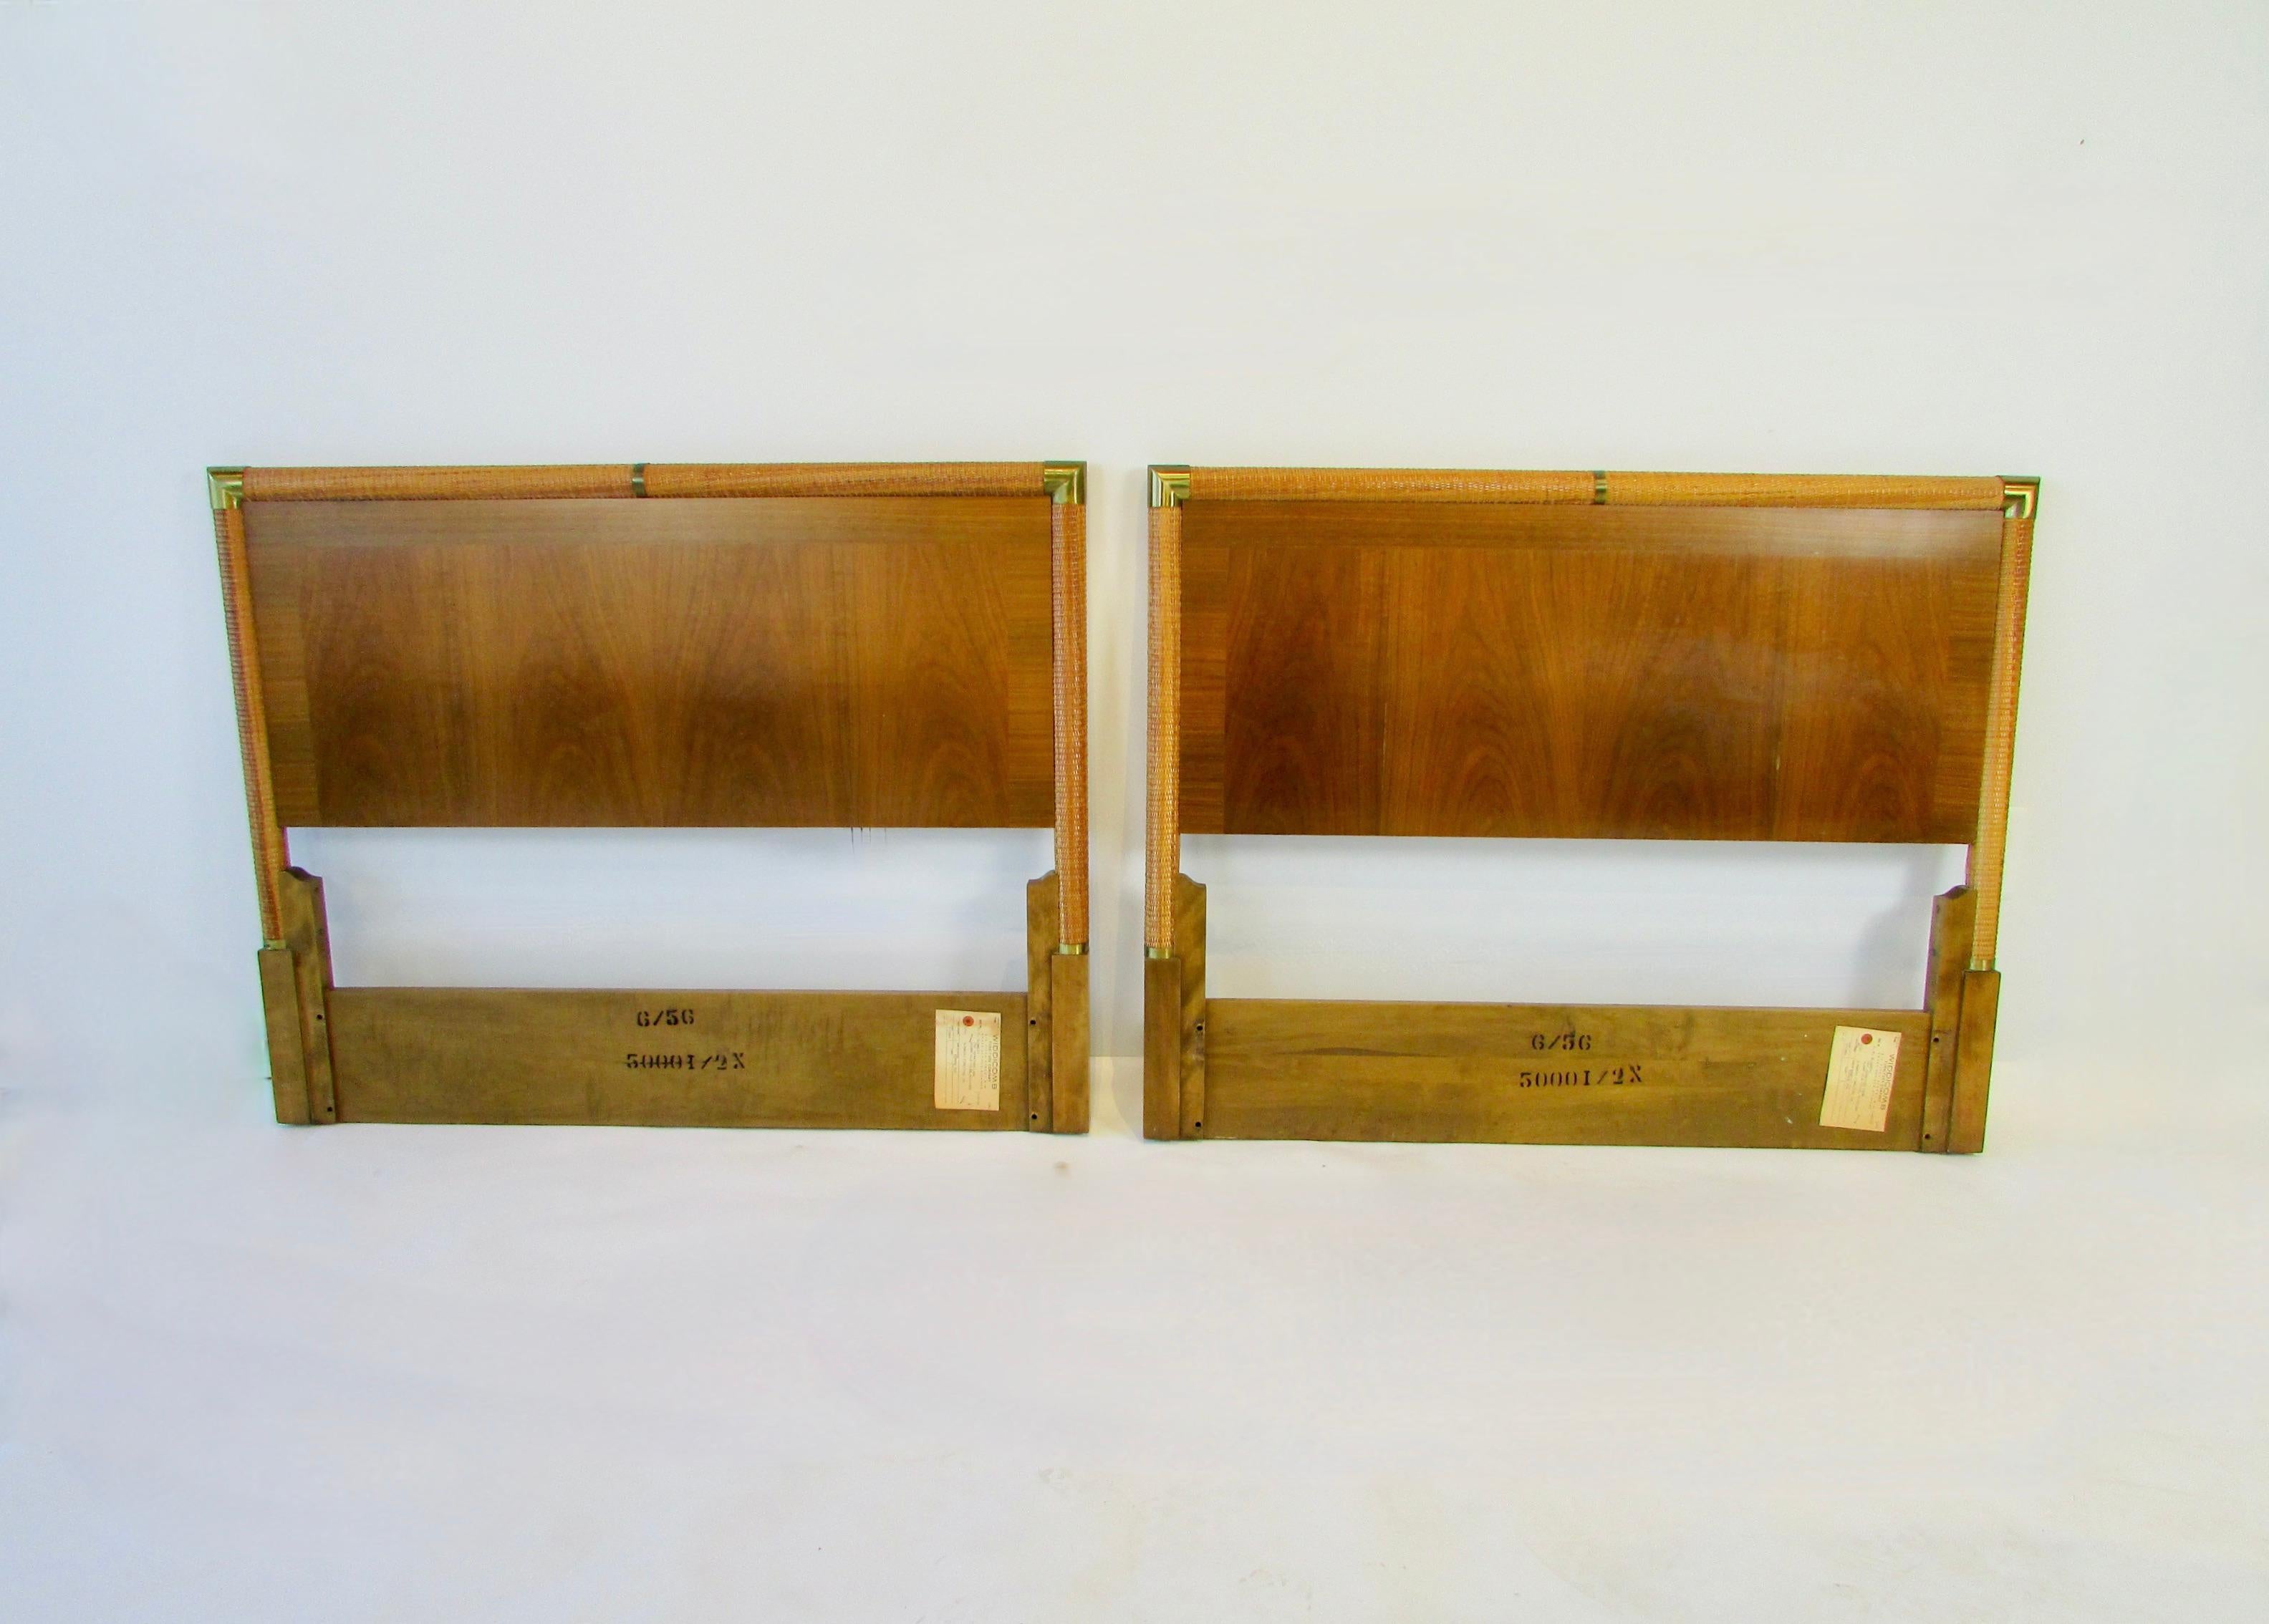 Very clean original Robsjohn Gibbings for Widdicomb headboards for single bed. Well made with rafia wrapped frame in excellent condition. Widdicomb paper label and date stamped 6/56.